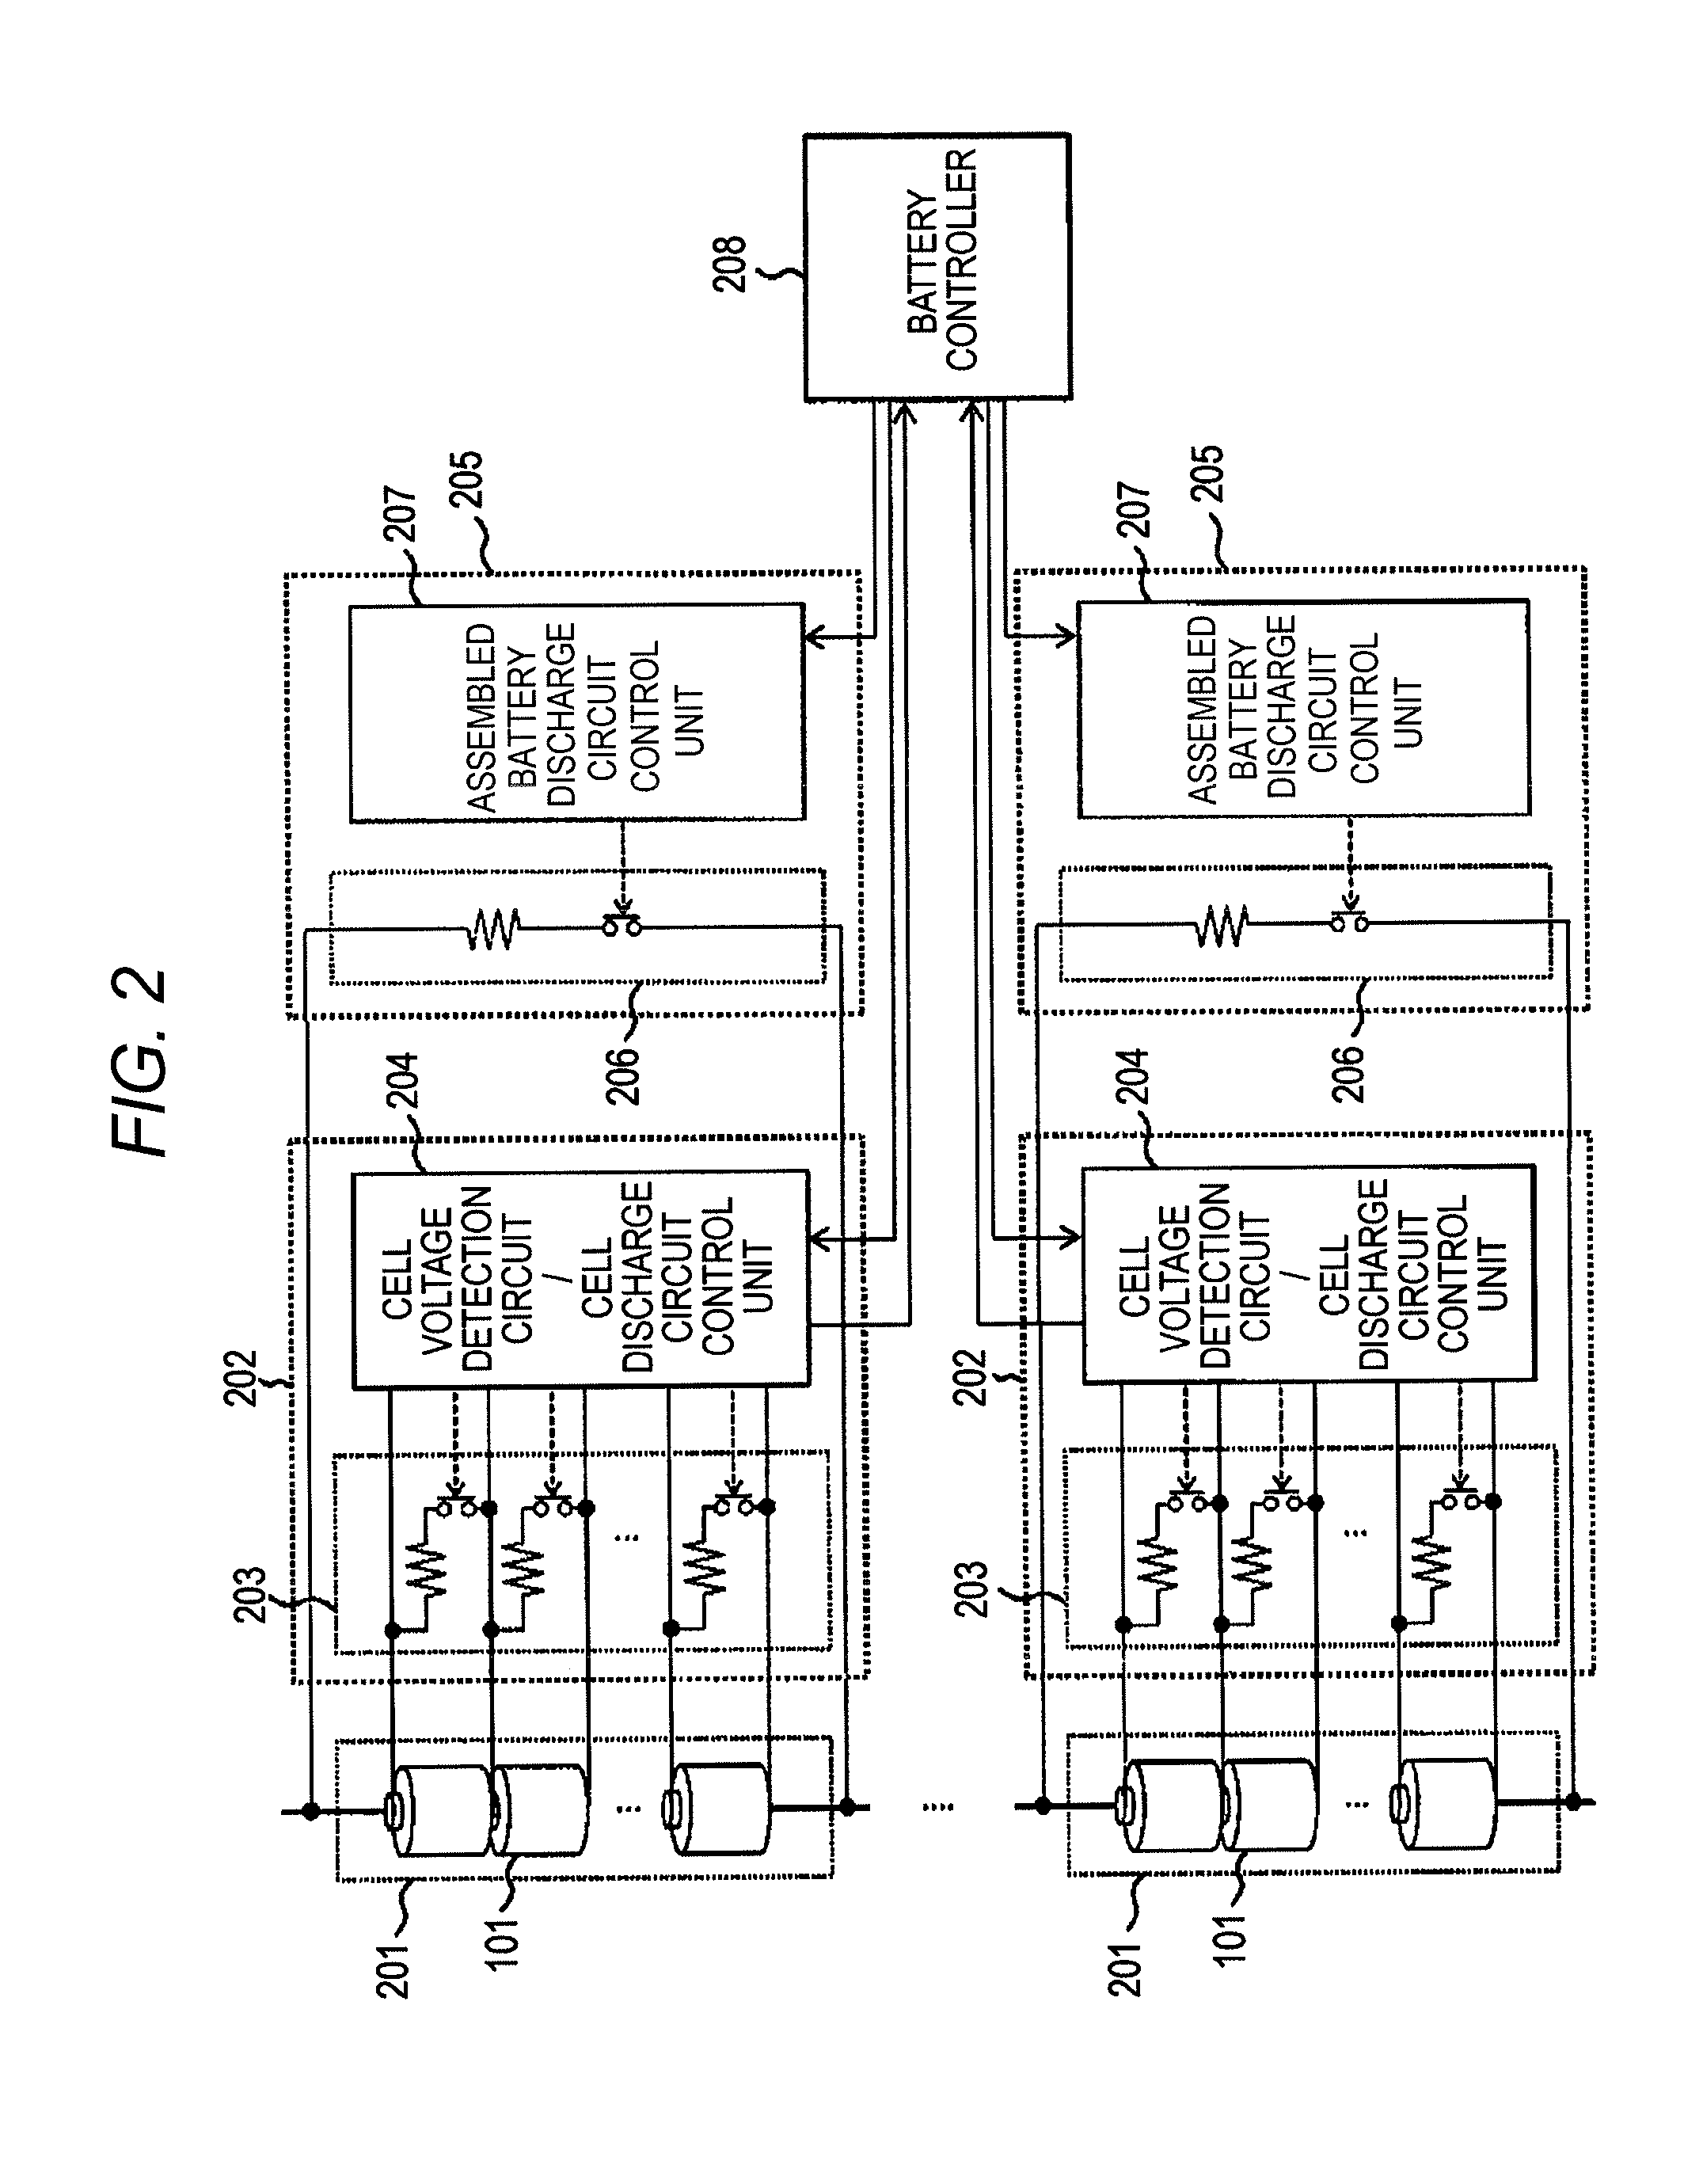 Battery System Control Method